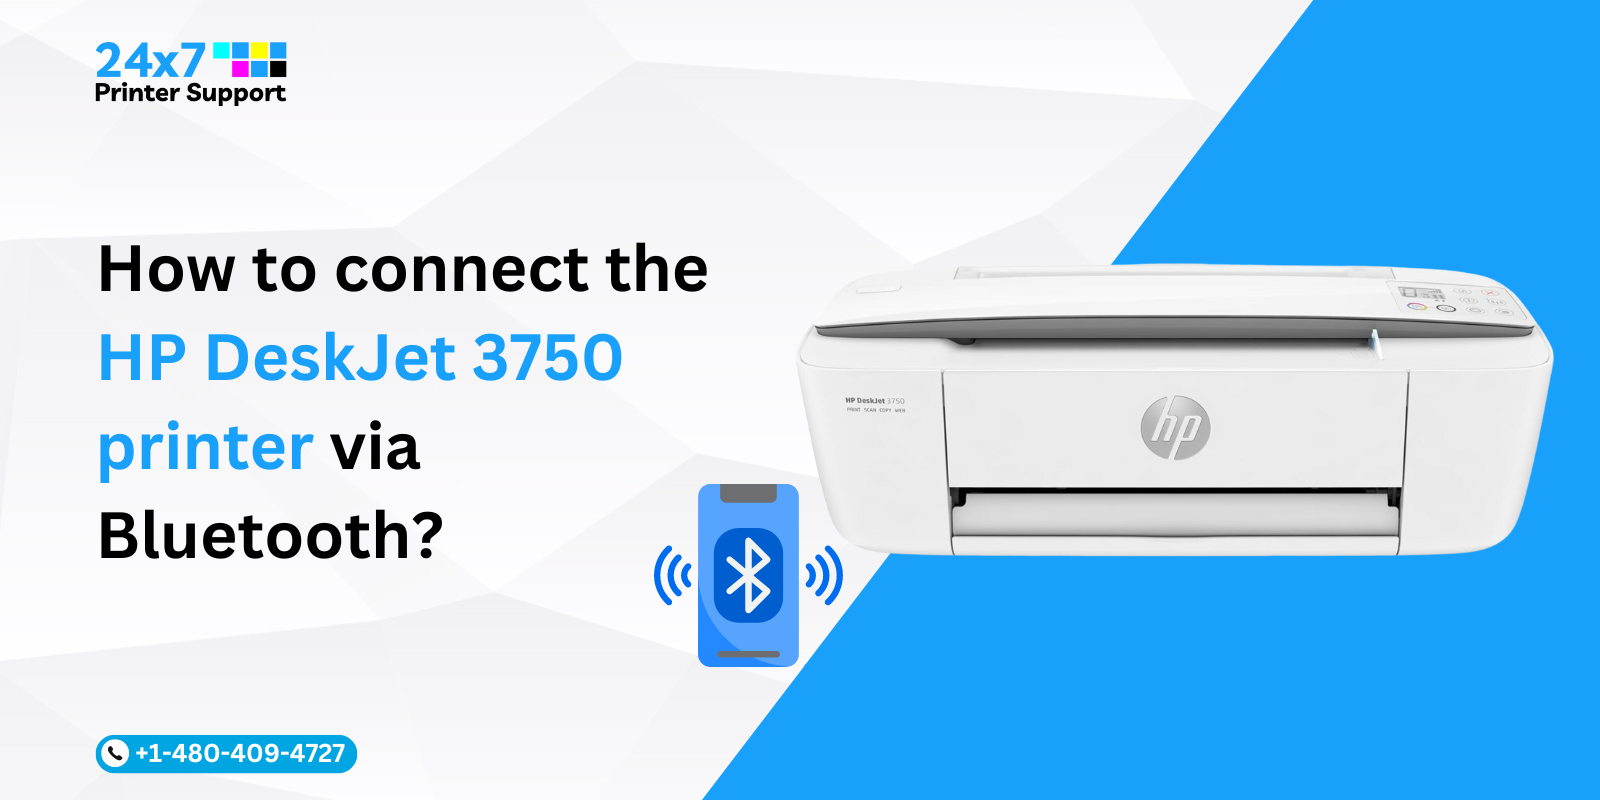 How to connect the HP DeskJet 3750 printer via Bluetooth